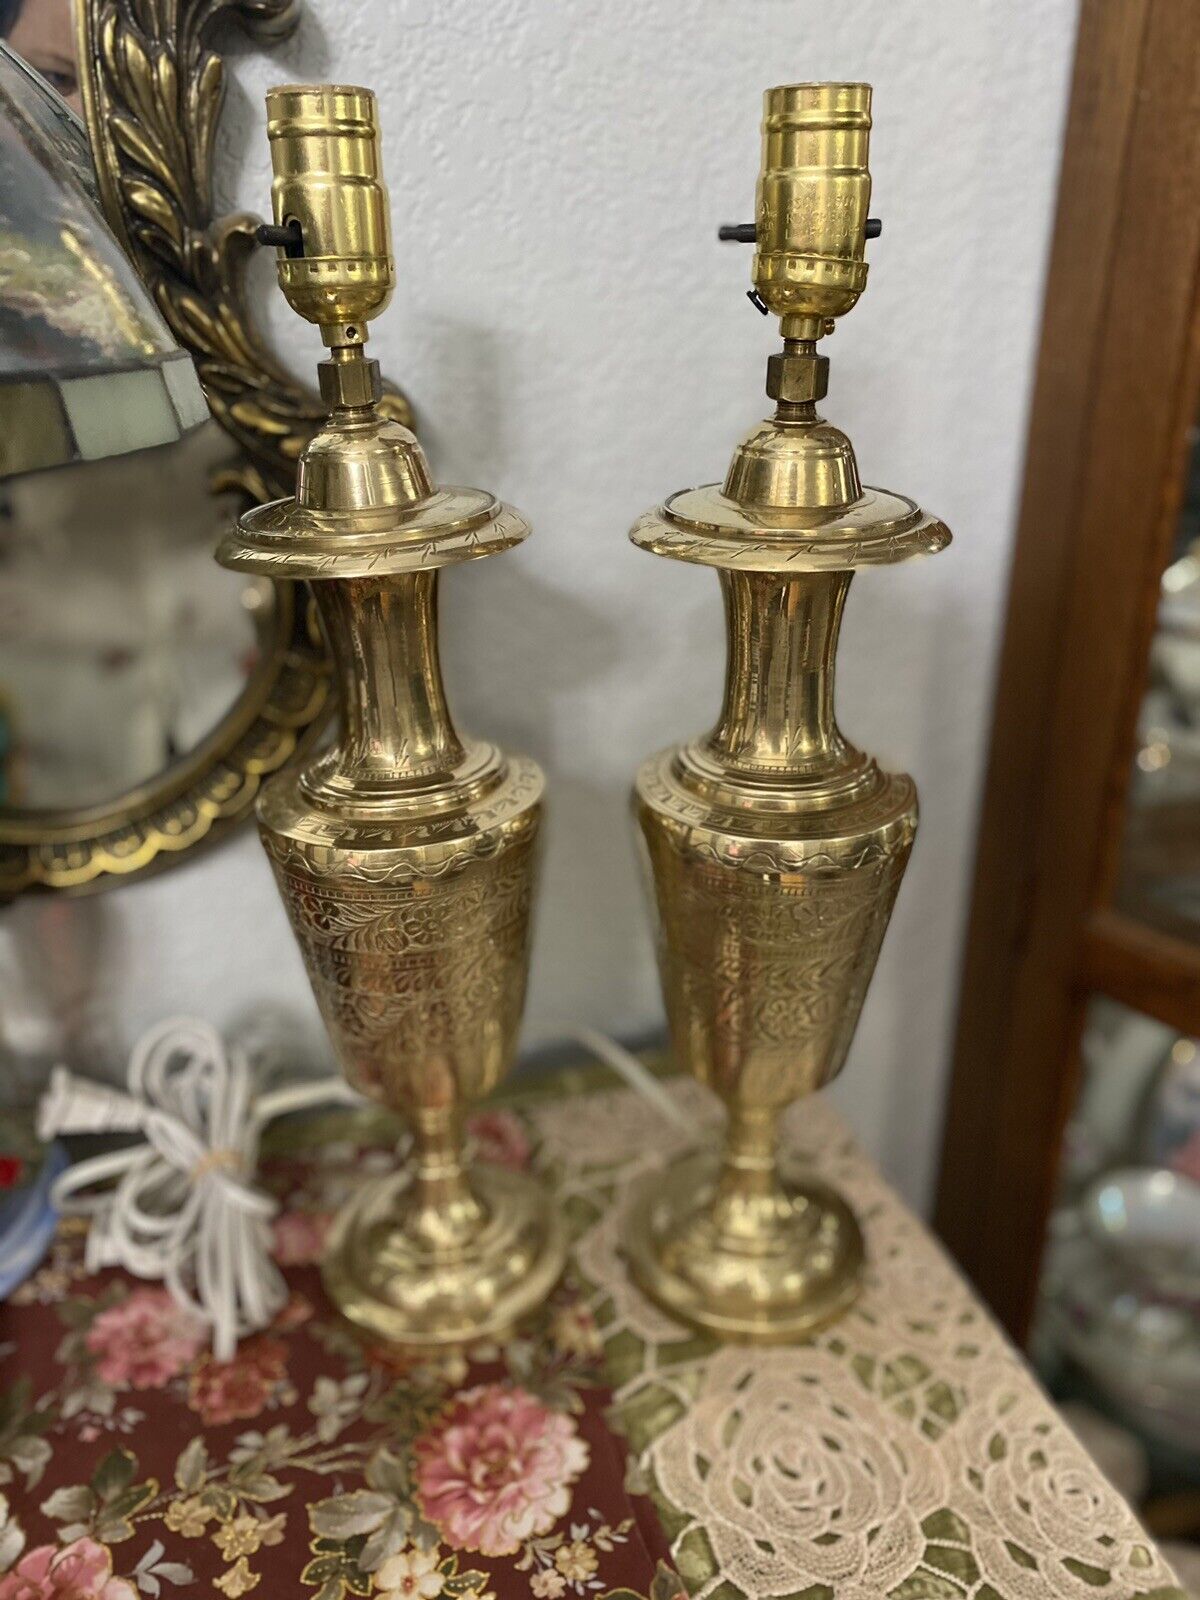 Pair of Antique Brass Table Lamps Turkish Style- Stamped Pakistan.